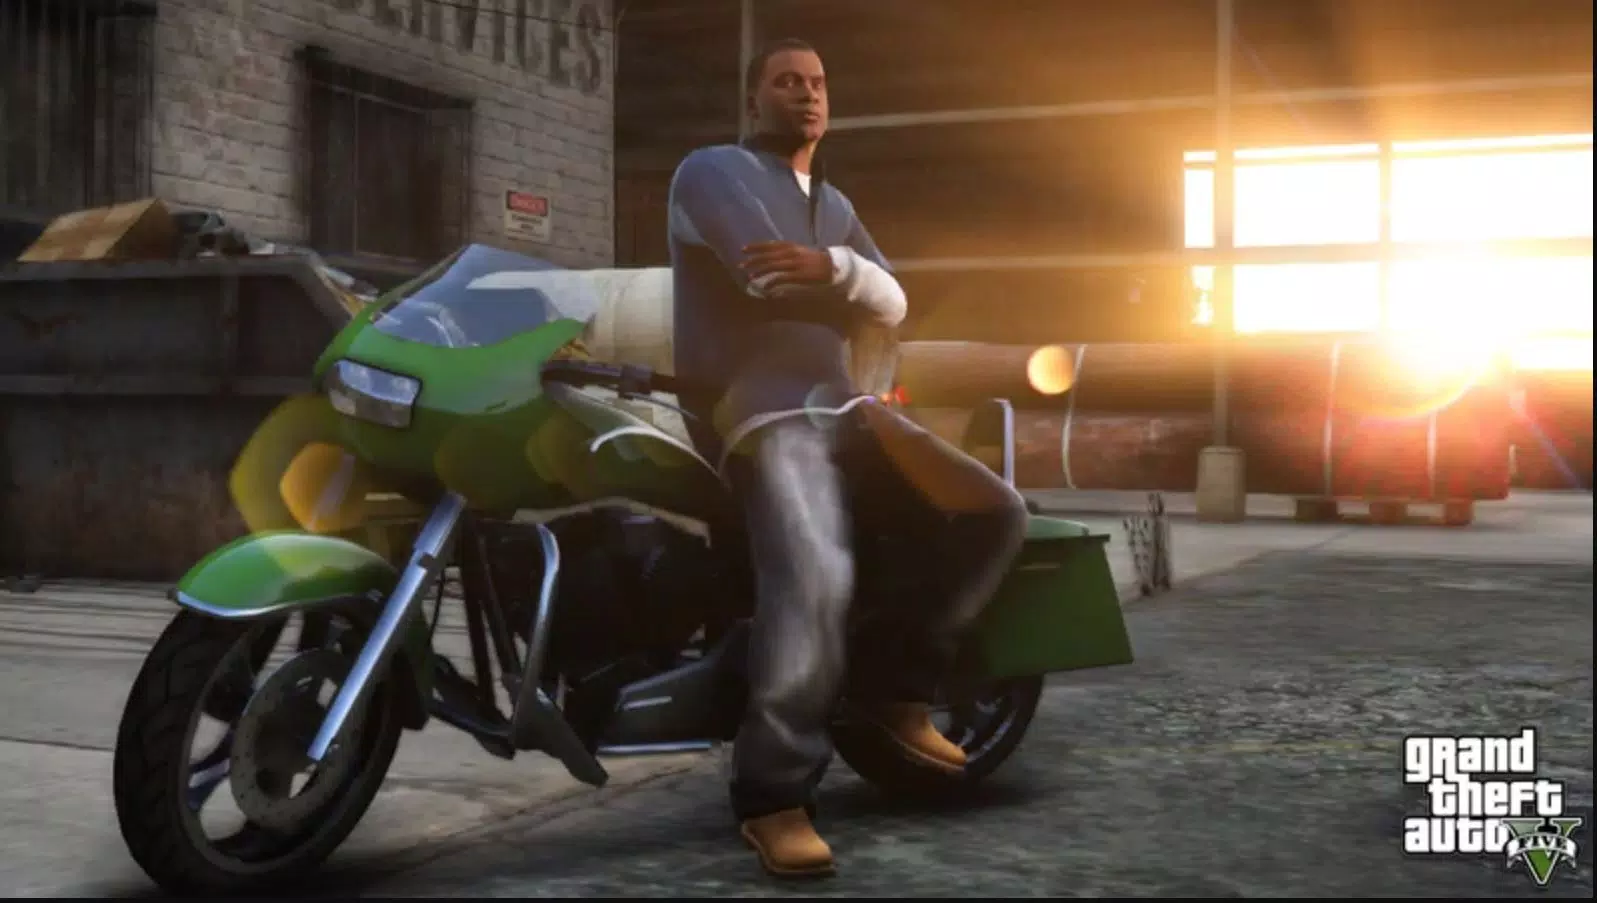 Download GTA V Or GTA APK For Android The Game Is Free, 42% OFF